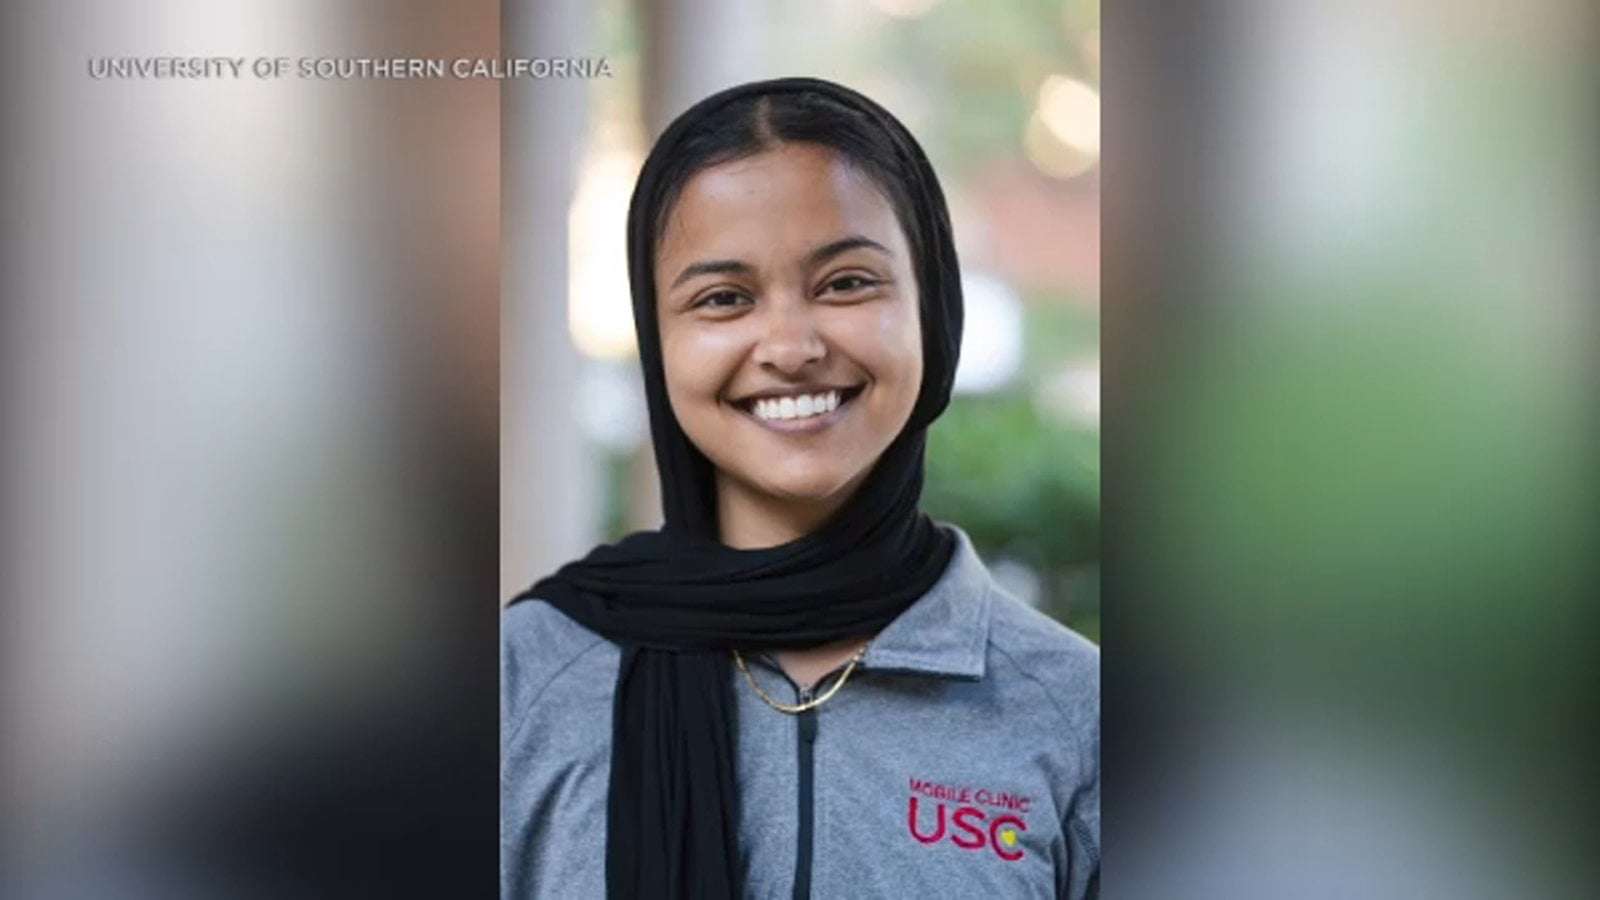 image for USC bans pro-Palestinian valedictorian from speaking at May commencement, citing safety concerns